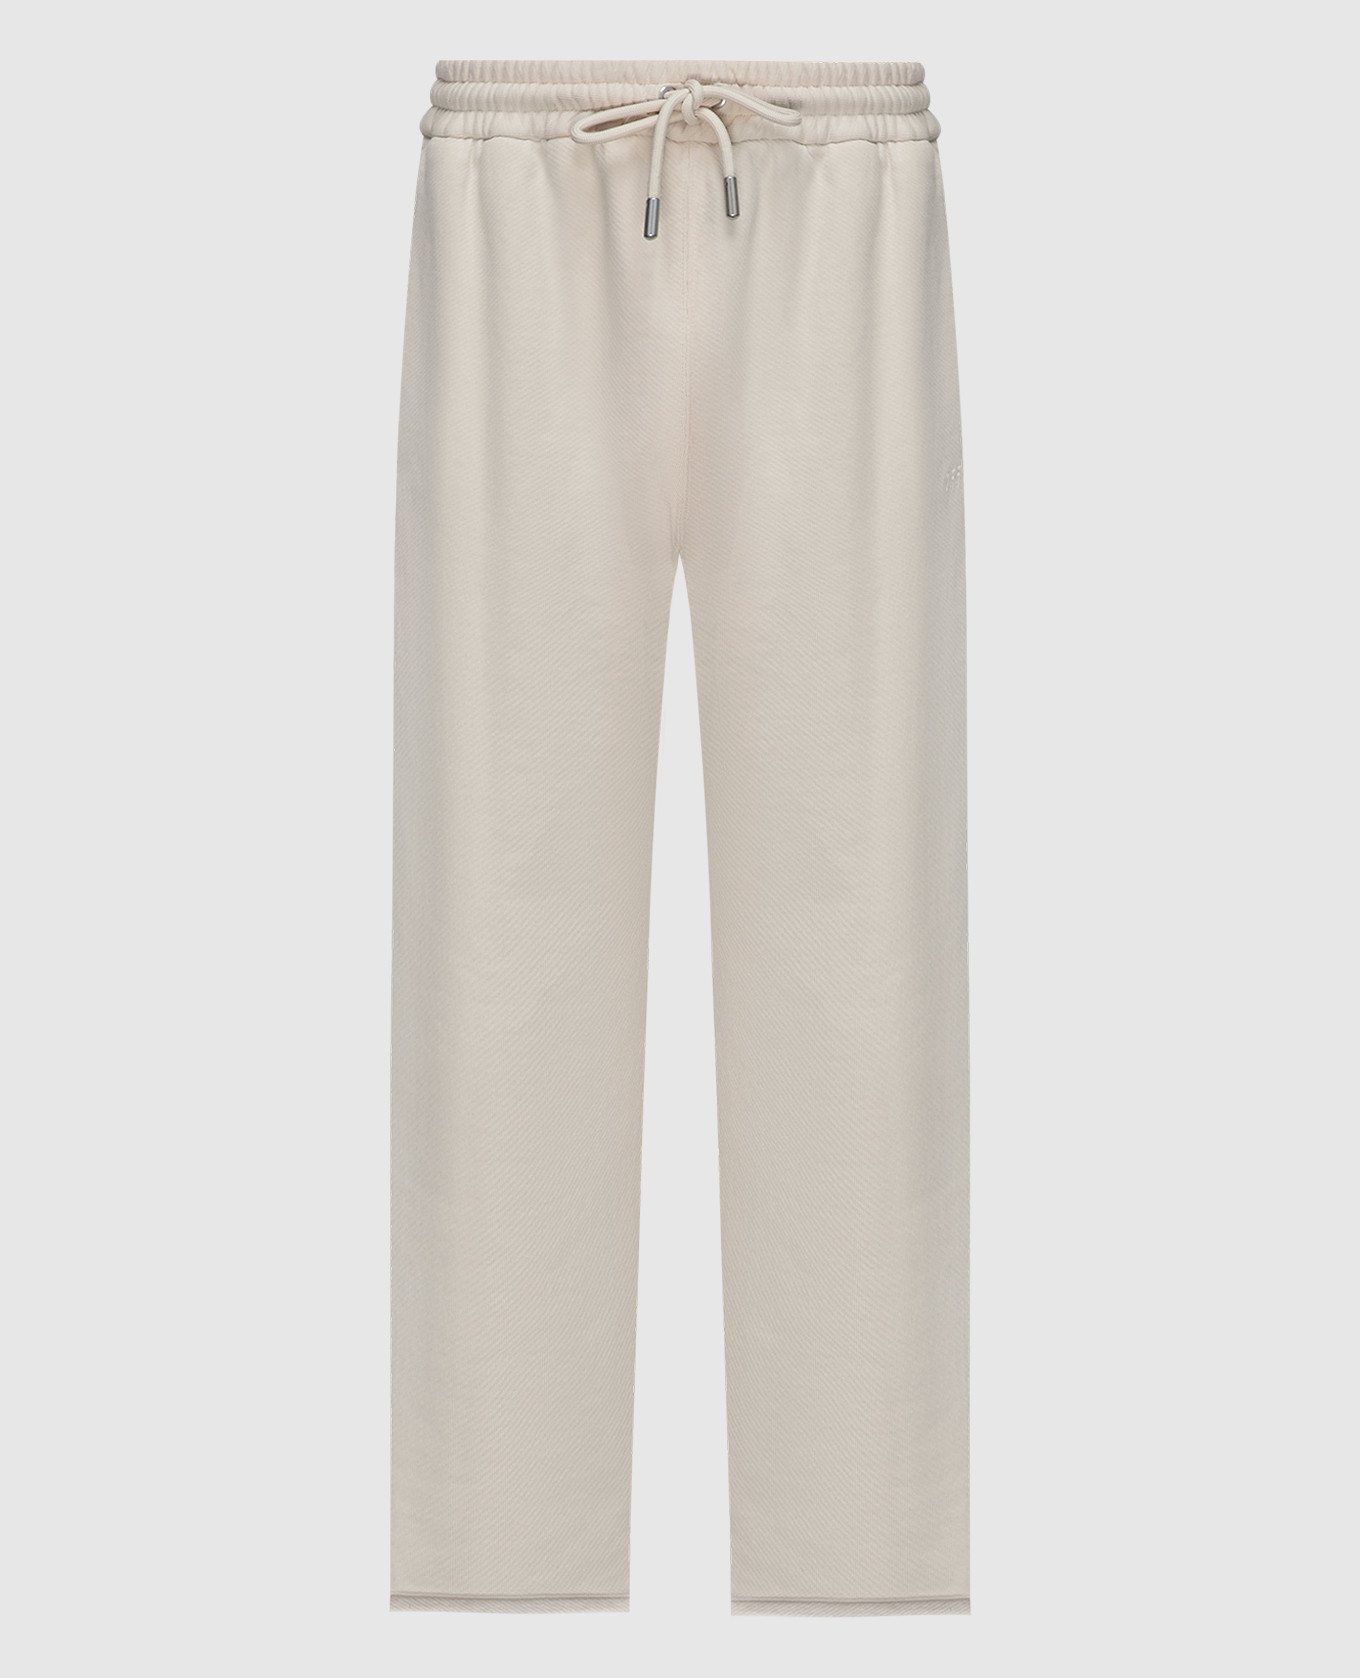 Beige sweatpants with logo embroidery